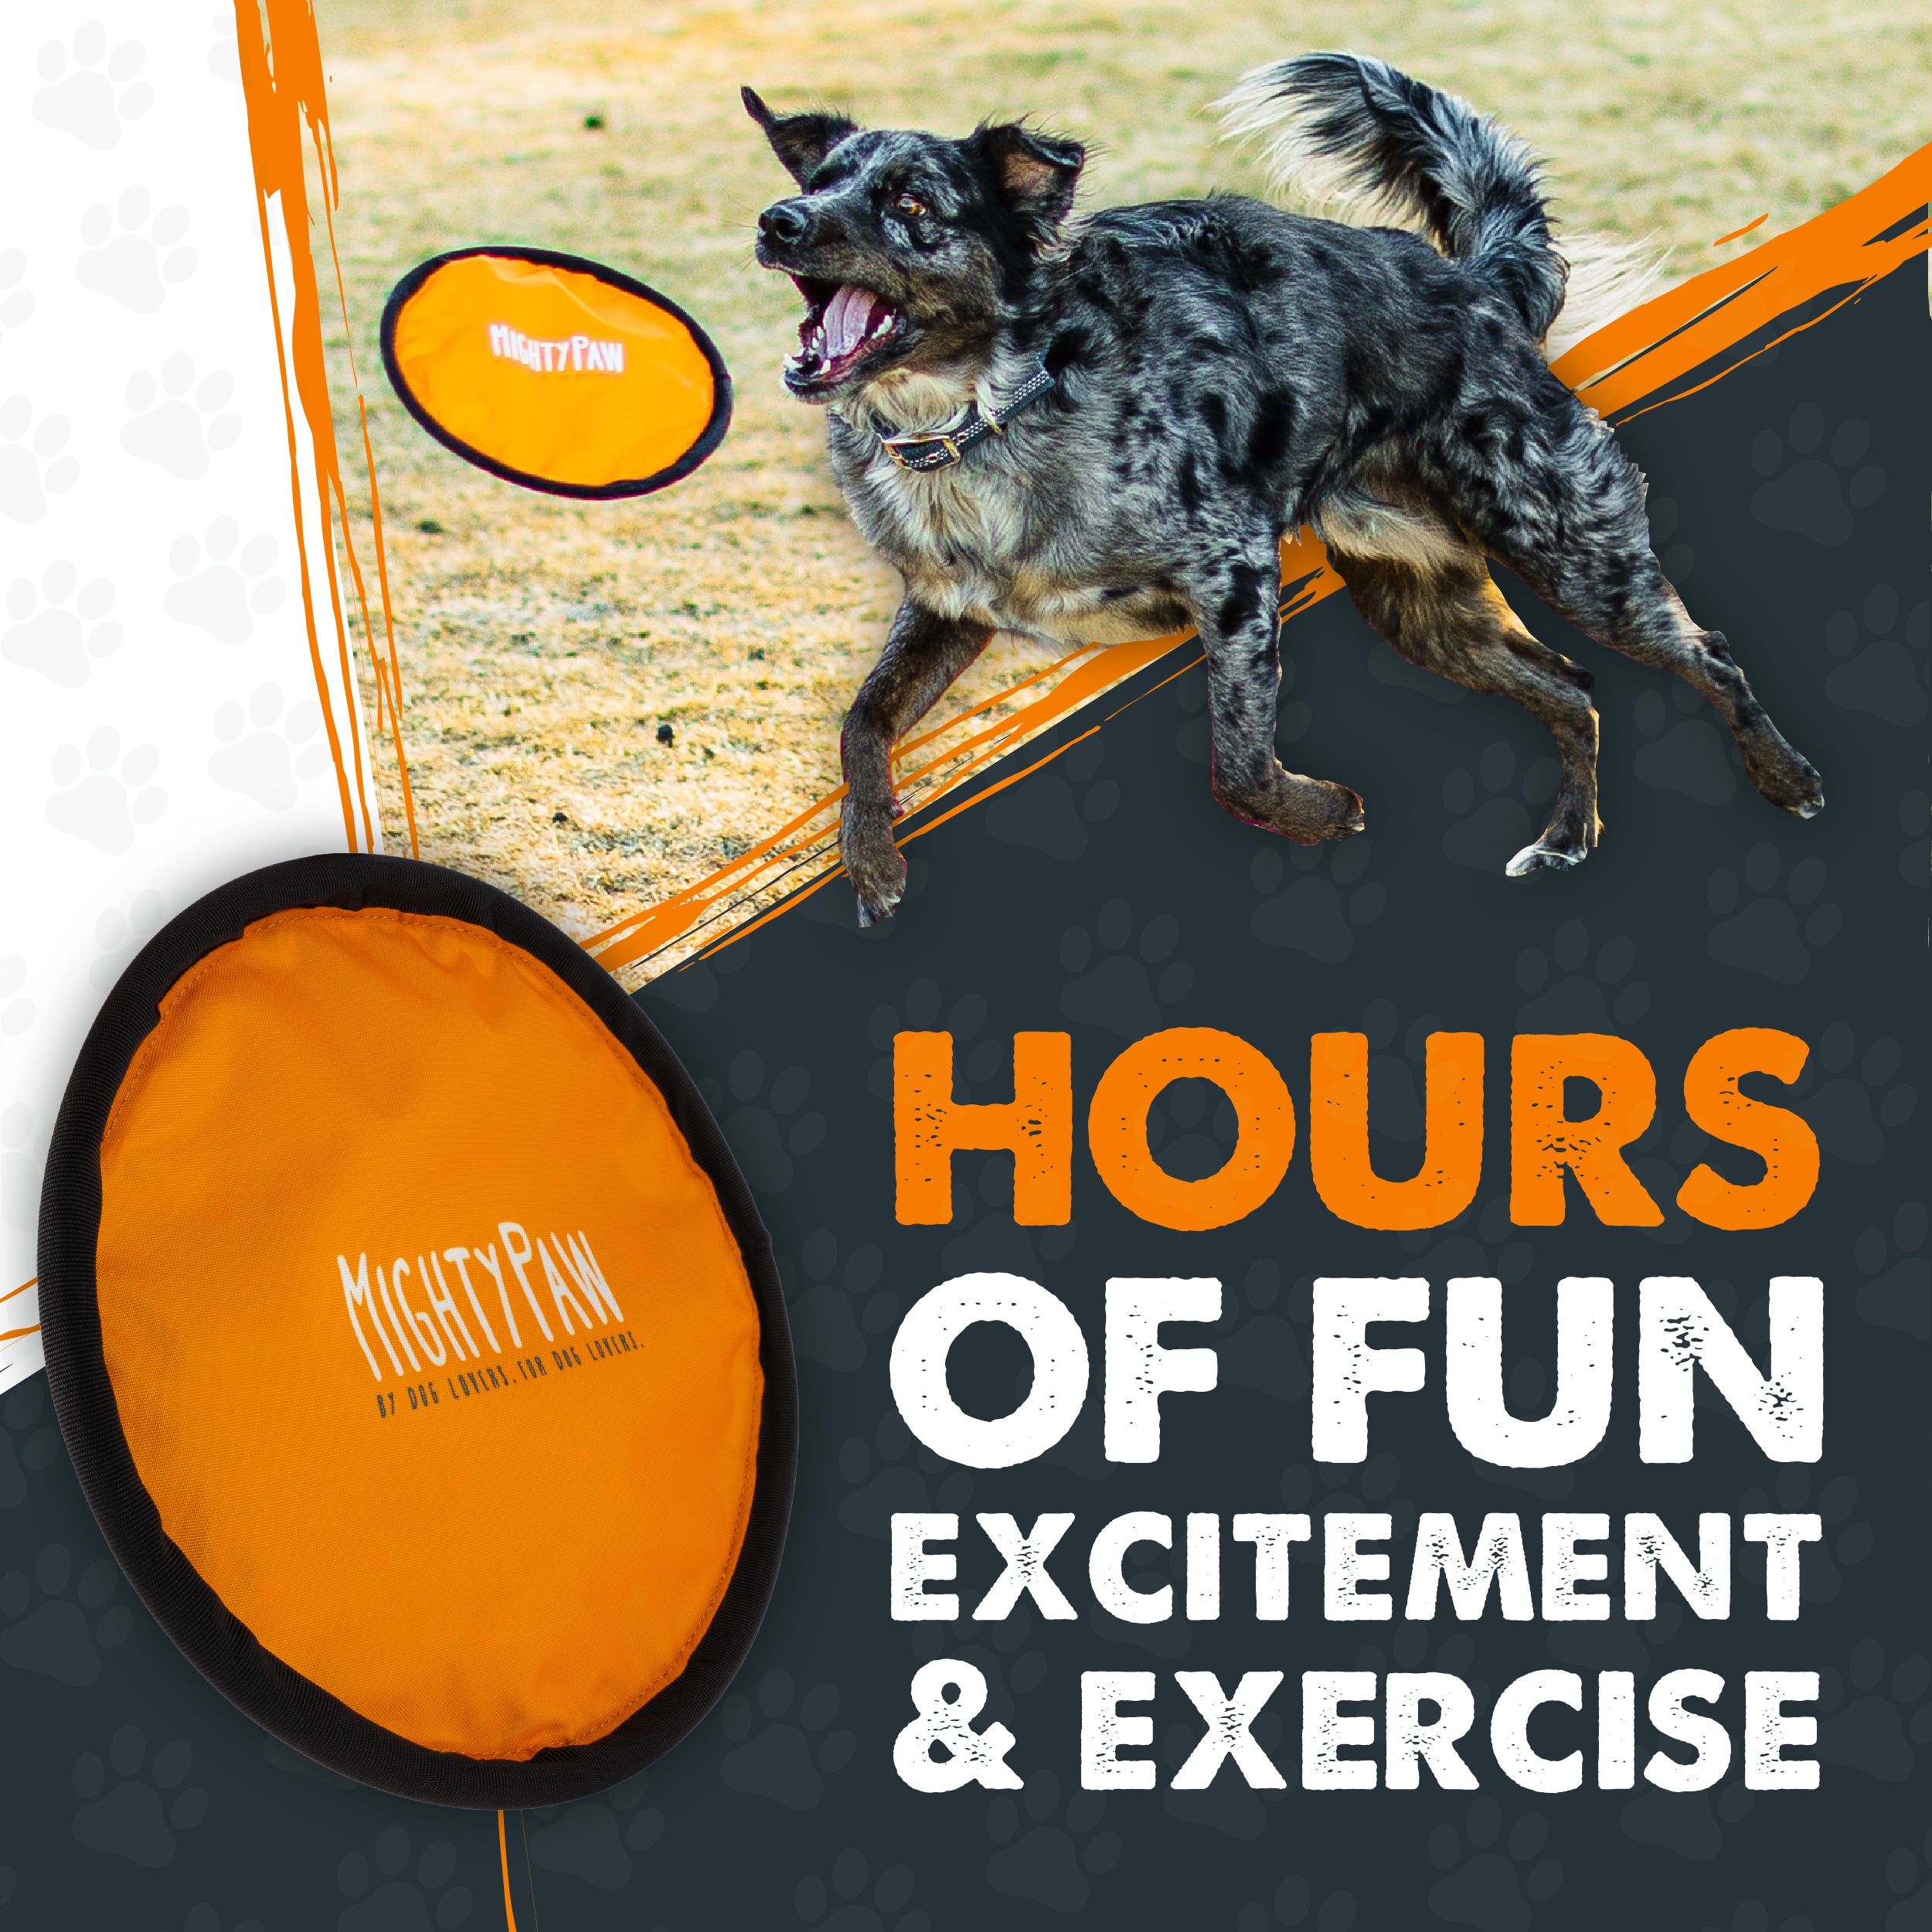 Mighty Paw Dog Frisbee (2 Pack)